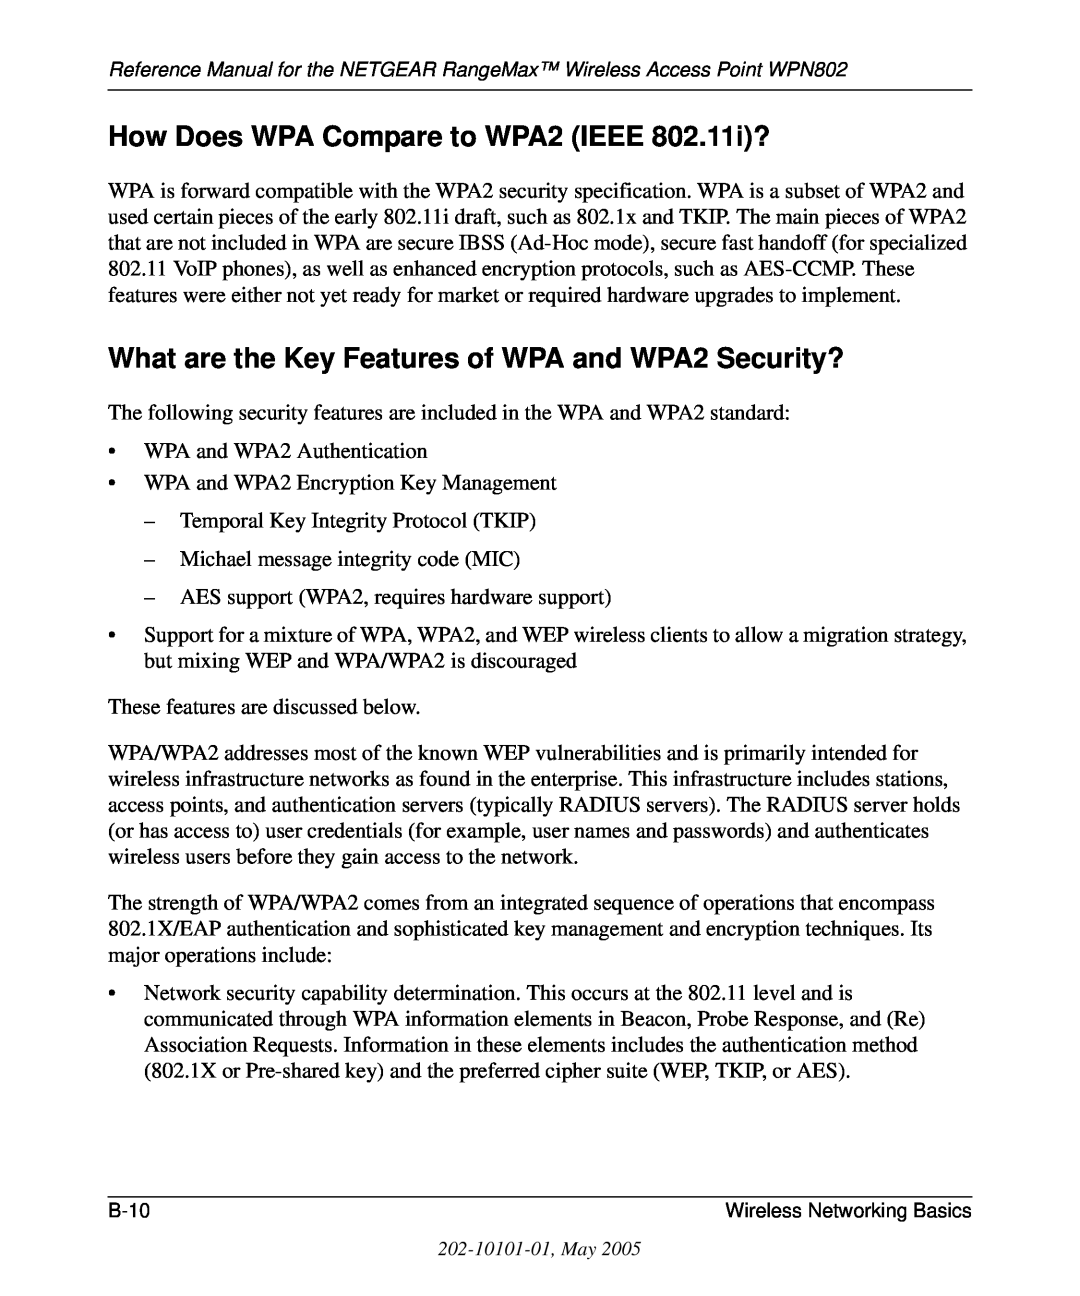 NETGEAR WPN802 manual How Does WPA Compare to WPA2 IEEE 802.11i?, What are the Key Features of WPA and WPA2 Security? 